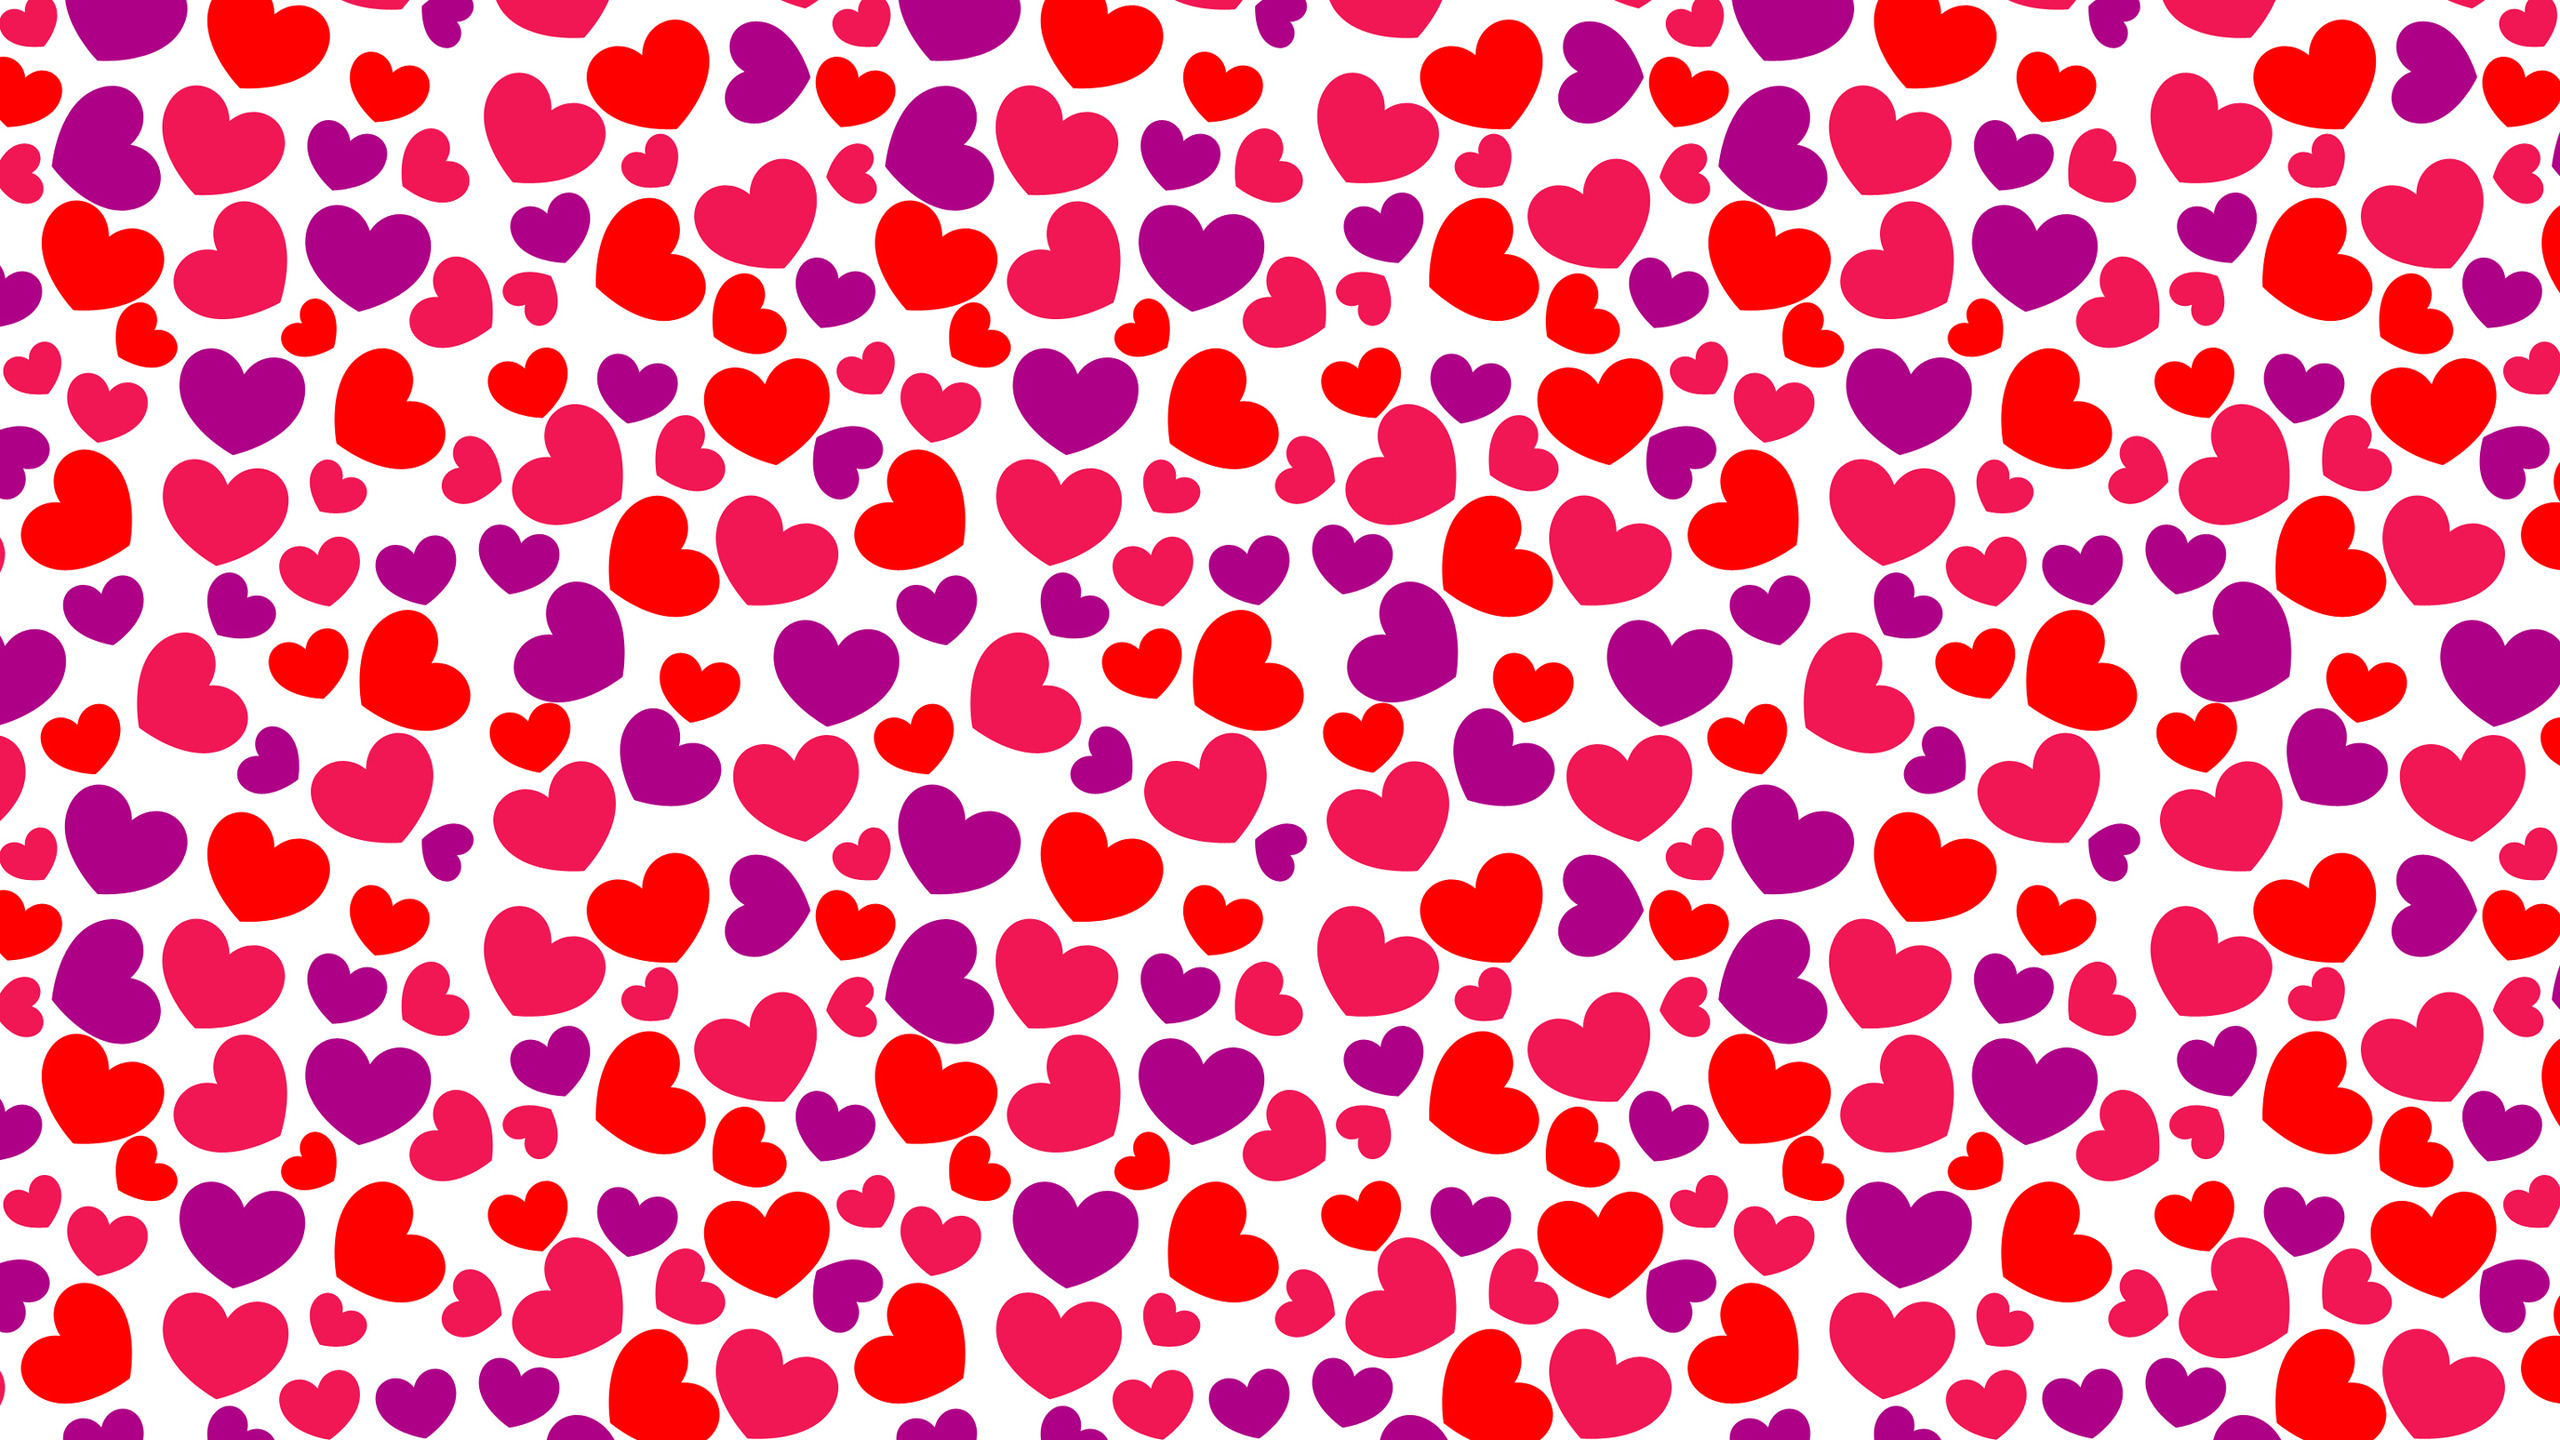 Awesome Heart Pattern Wallpaper 41519 2560x1440px